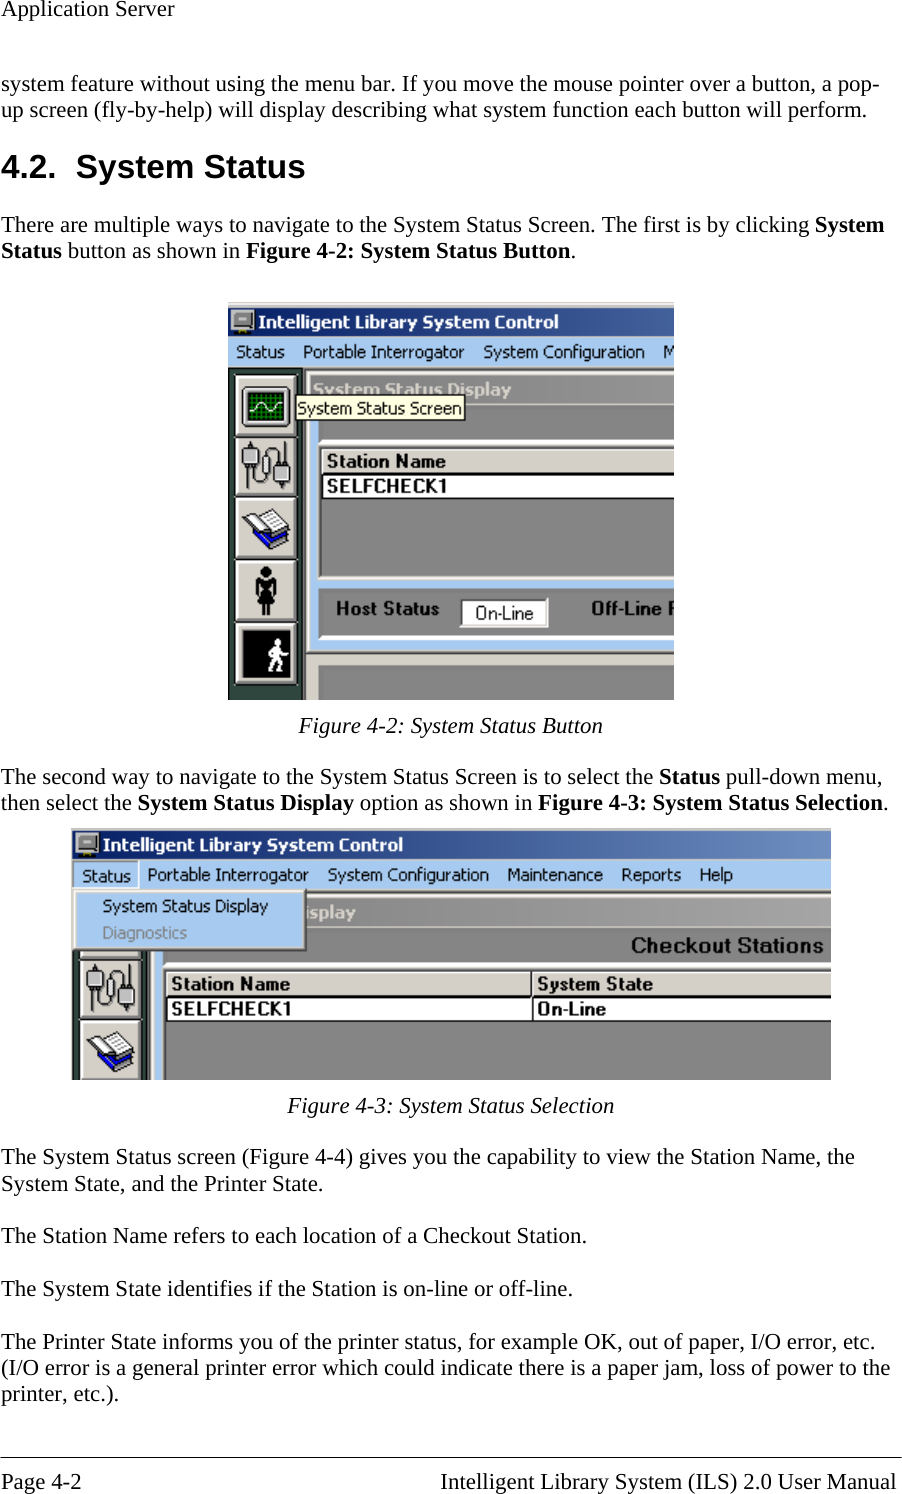 Application Server system feature without using the menu bar. If you move the mouse pointer over a button, a pop-up screen (fly-by-help) will display describing what system function each button will perform. tton. 4.2. System Status There are multiple ways to navigate to the System Status Screen. The first is by clicking System Status button as shown in Figure 4-2: System Status Bu  Figure 4-2: System Status Button stem Status Screen is to select the Status pull-down menu, en select the System Status Display option as shown in Figure 4-3: System Status Selection. The second way to navigate to the Syth Figure 4-3: System Status Selection The System Status screen (Figure 4-4) gives you the capability to view the Station Name, the System State, and the Printer State.  The Station Name refers to each location of a Checkout Station.  The System State identifies if the Station is on-line or off-line.  The Printer State informs you of the printer status, for example OK, out of paper, I/O error, etc. (I/O error is a general printer error which could indicate there is a paper jam, loss of power to the printer, etc.).  Page 4-2                                                       Intelligent Library System (ILS) 2.0 User Manual 